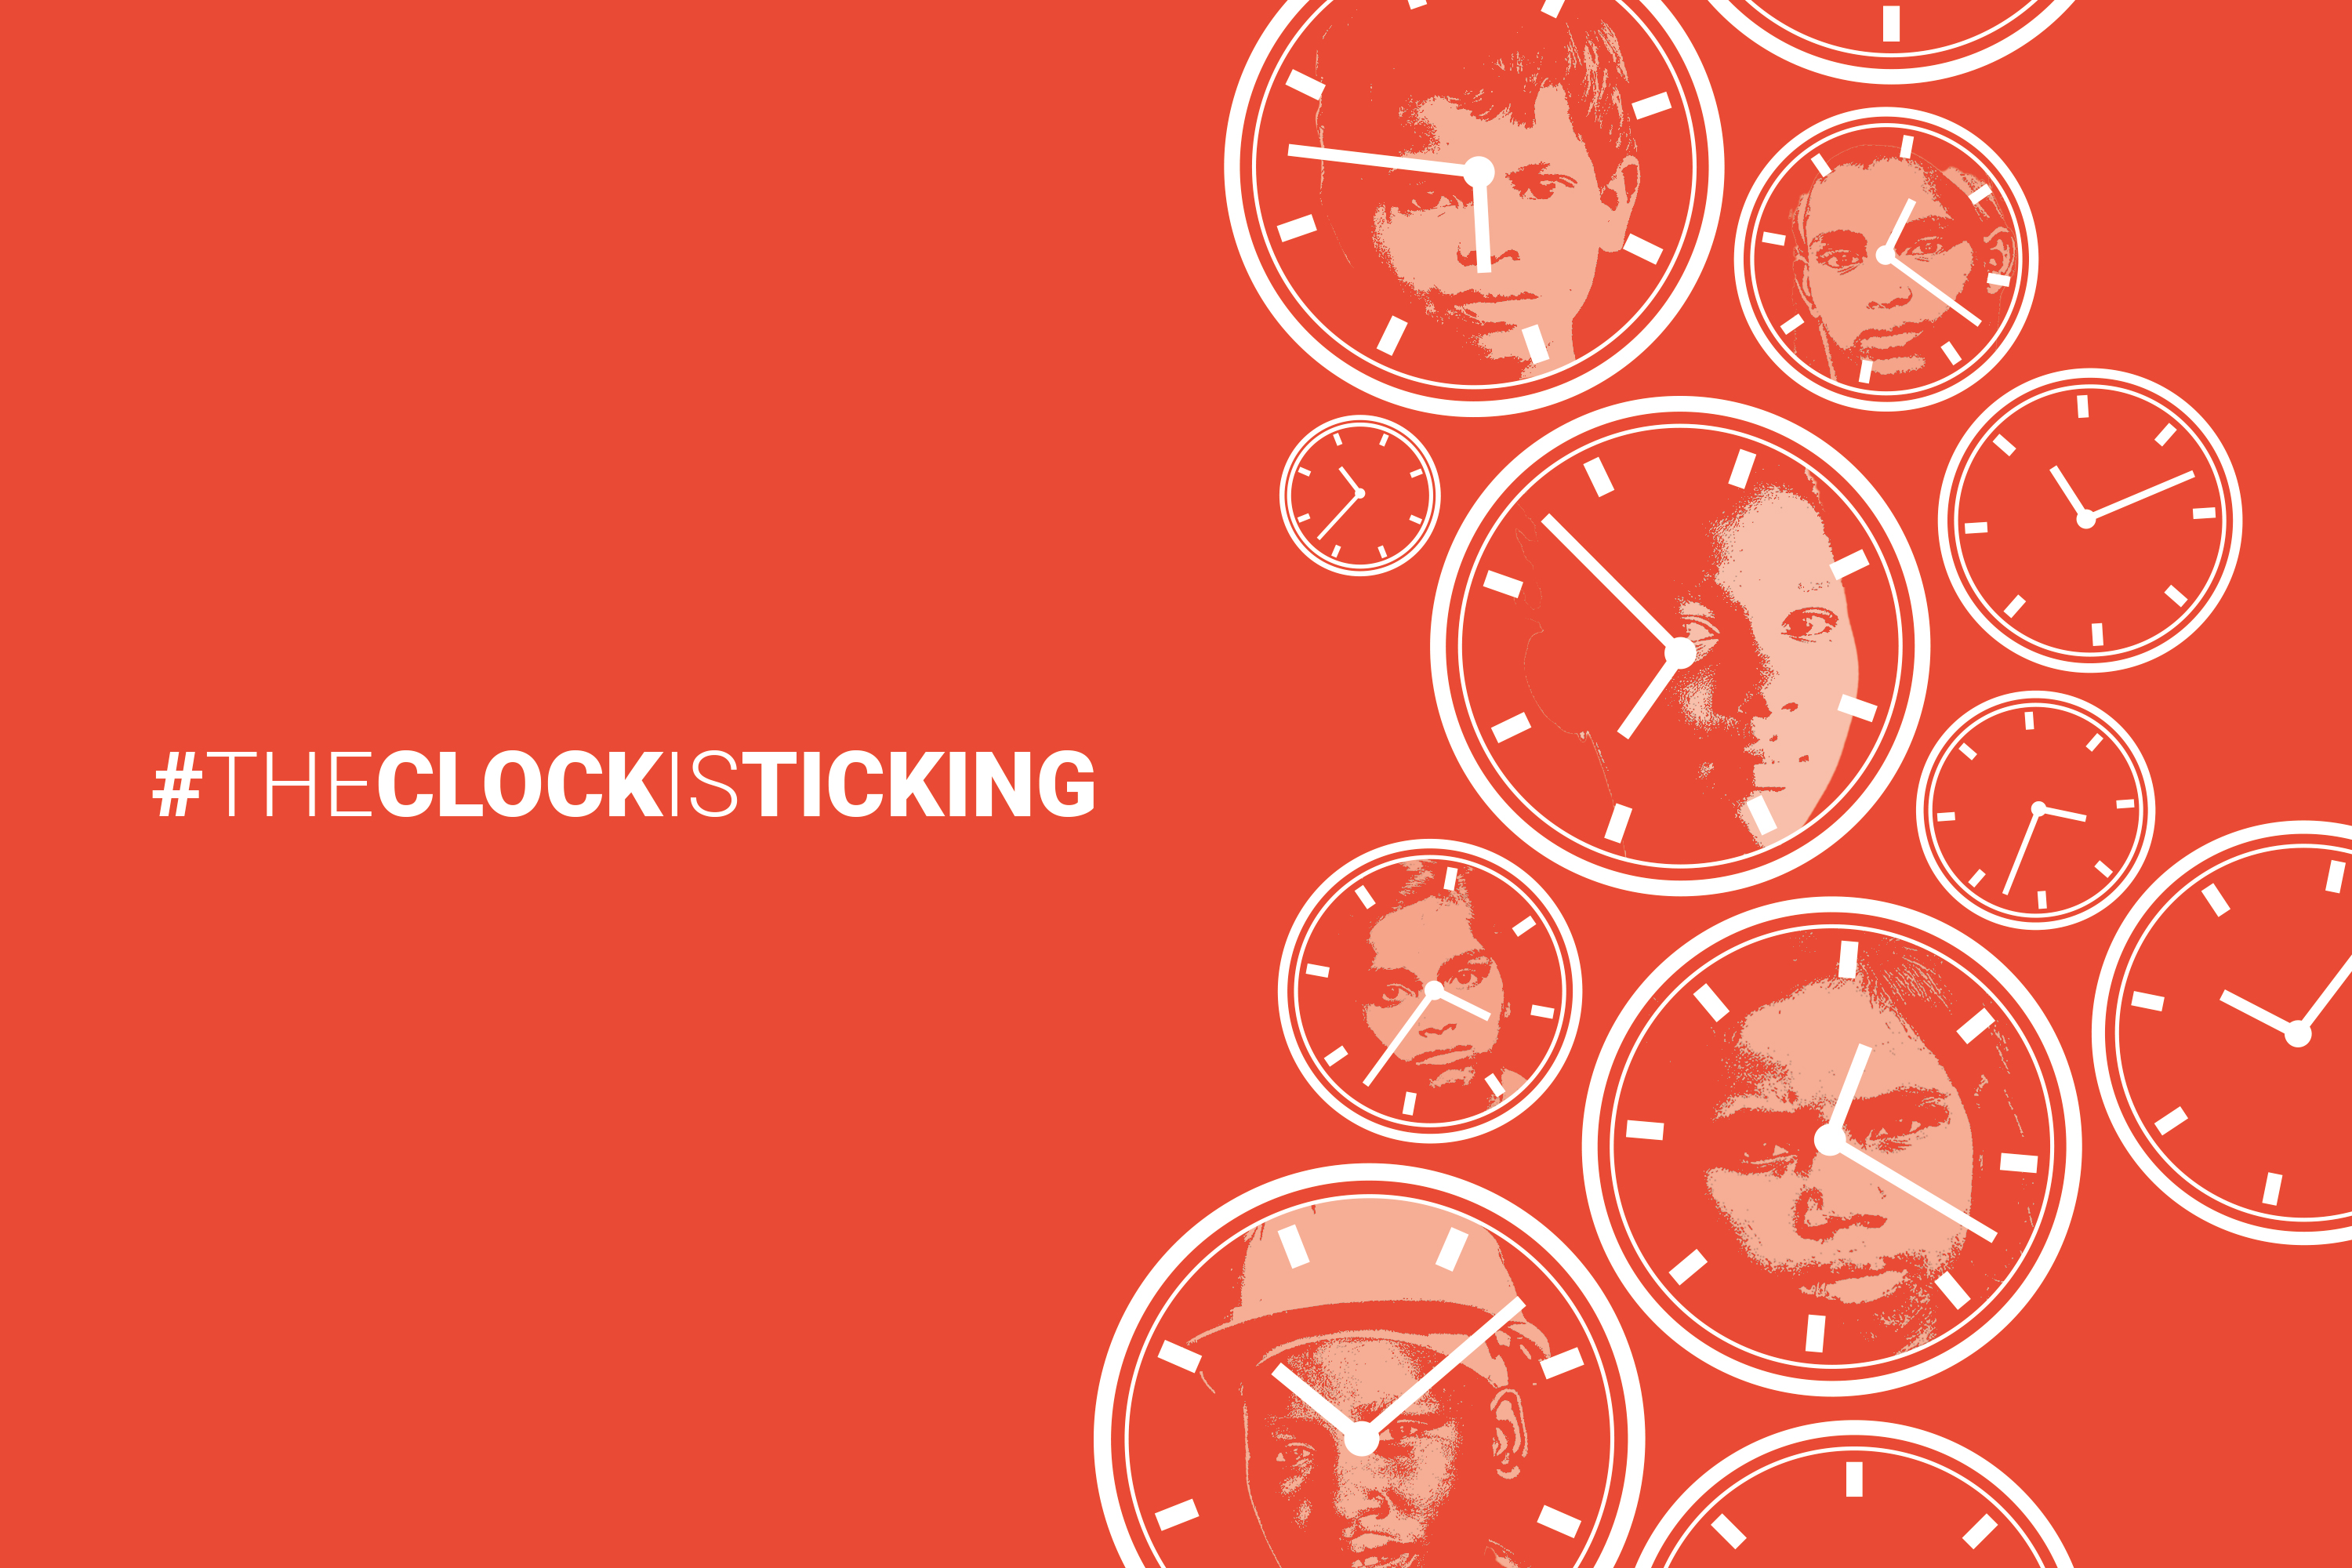 An image with multiple clocks with children faces in it en the text #theclockisticking